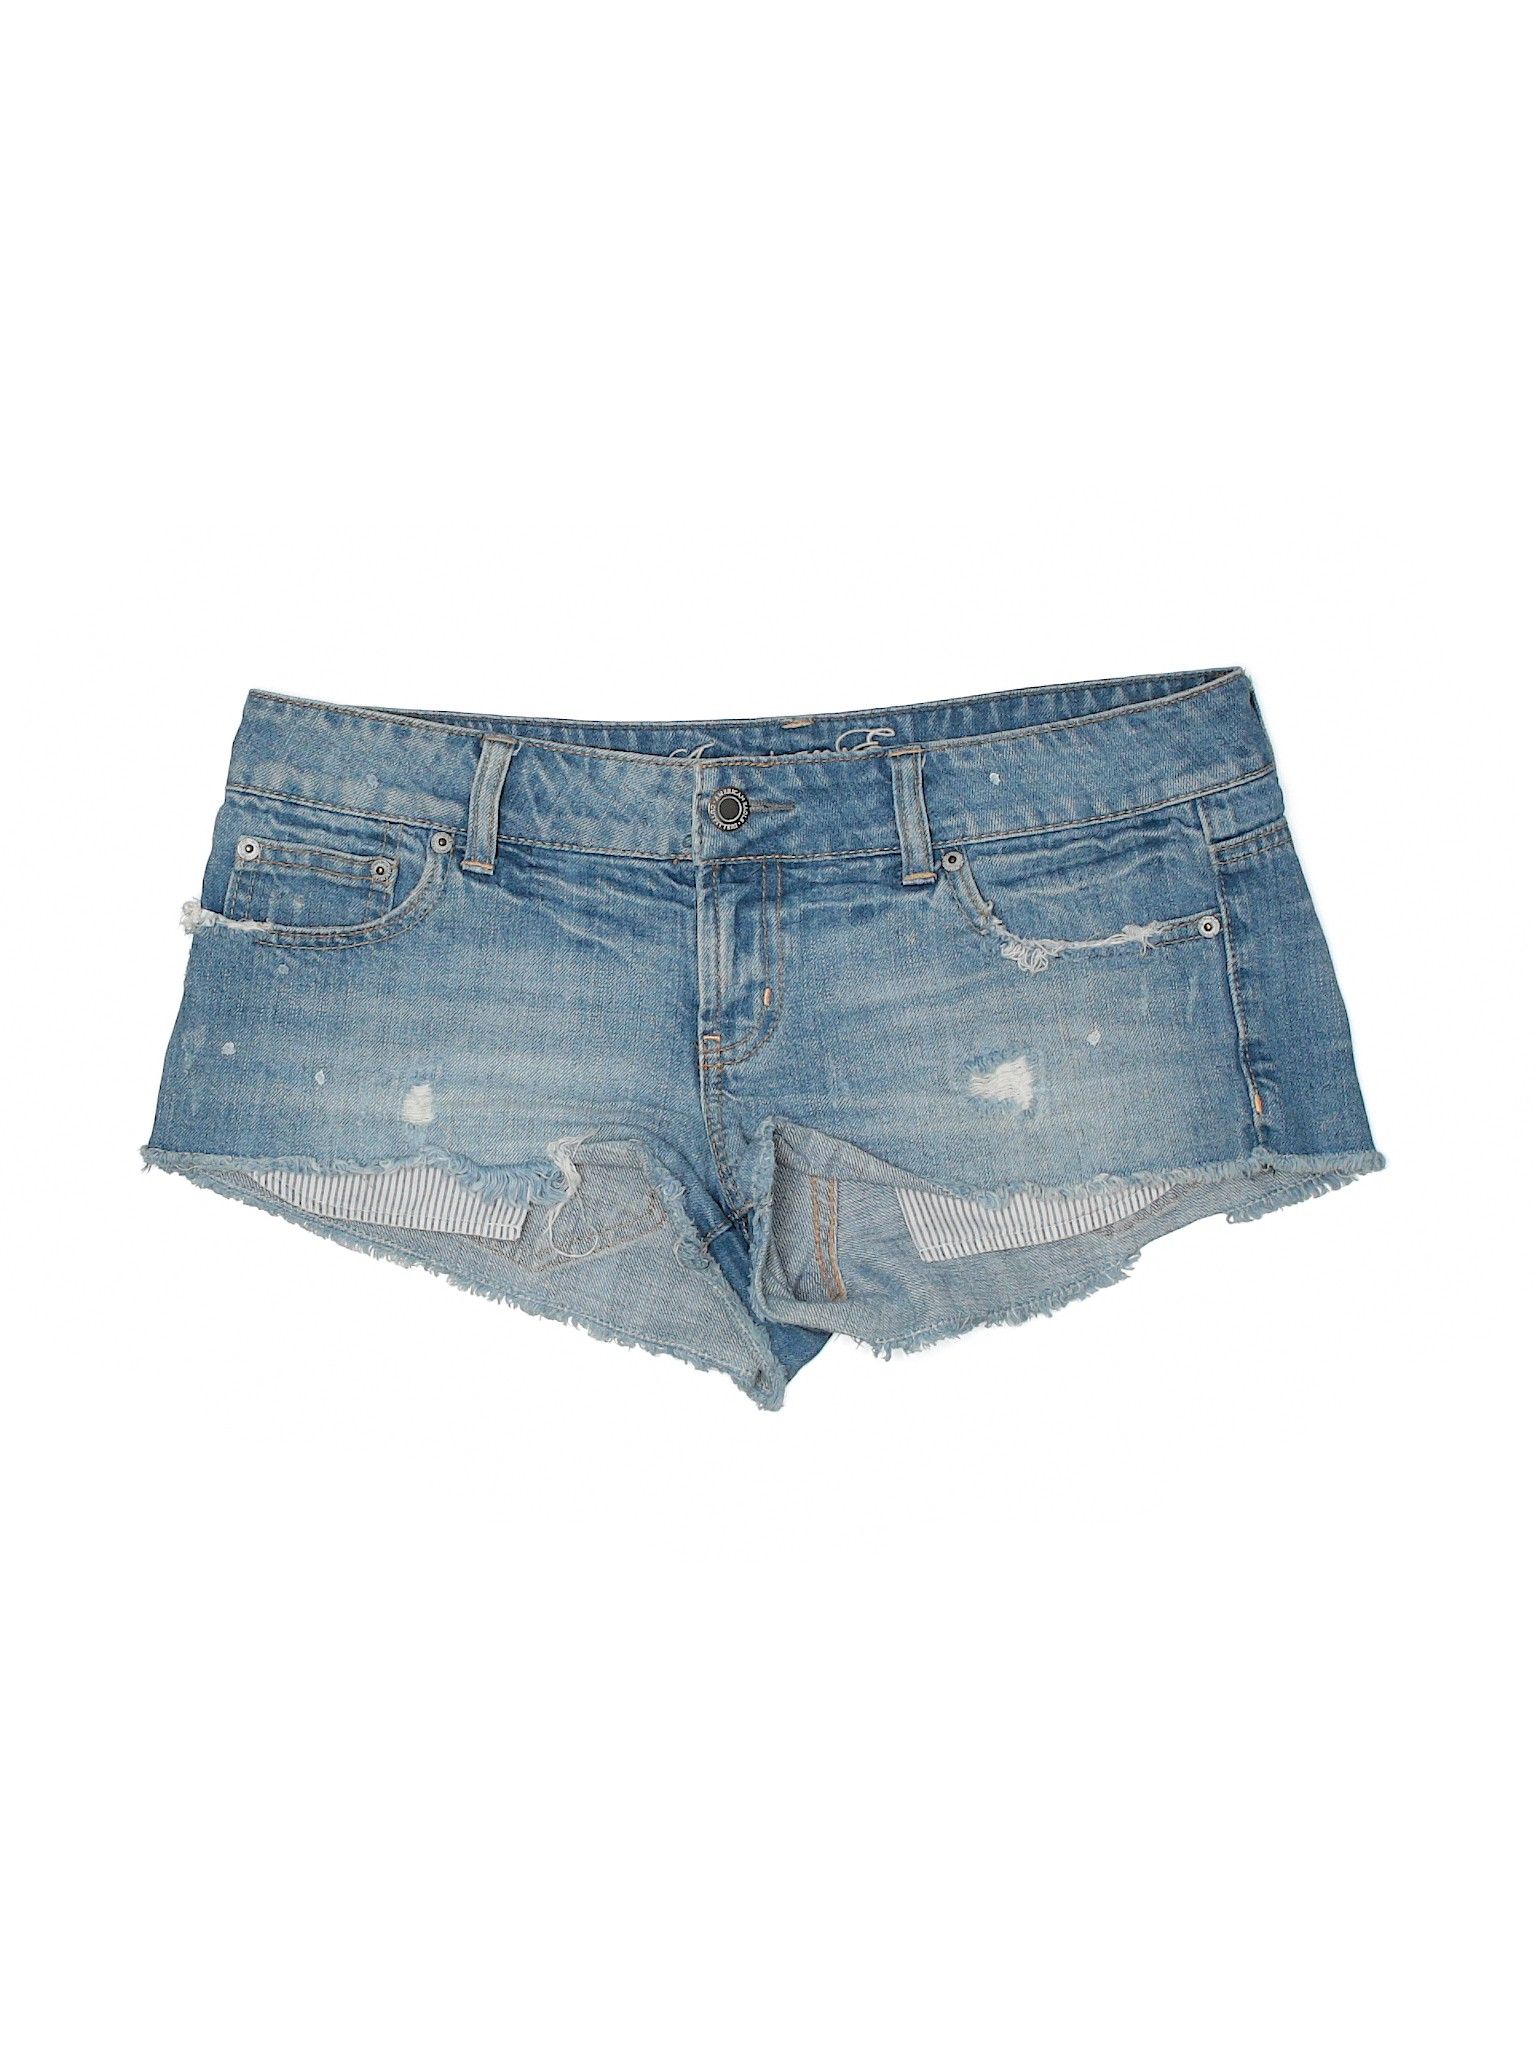 American Eagle Outfitters  Denim Shorts Size 8: Blue Women's Bottoms - 56422329 | thredUP